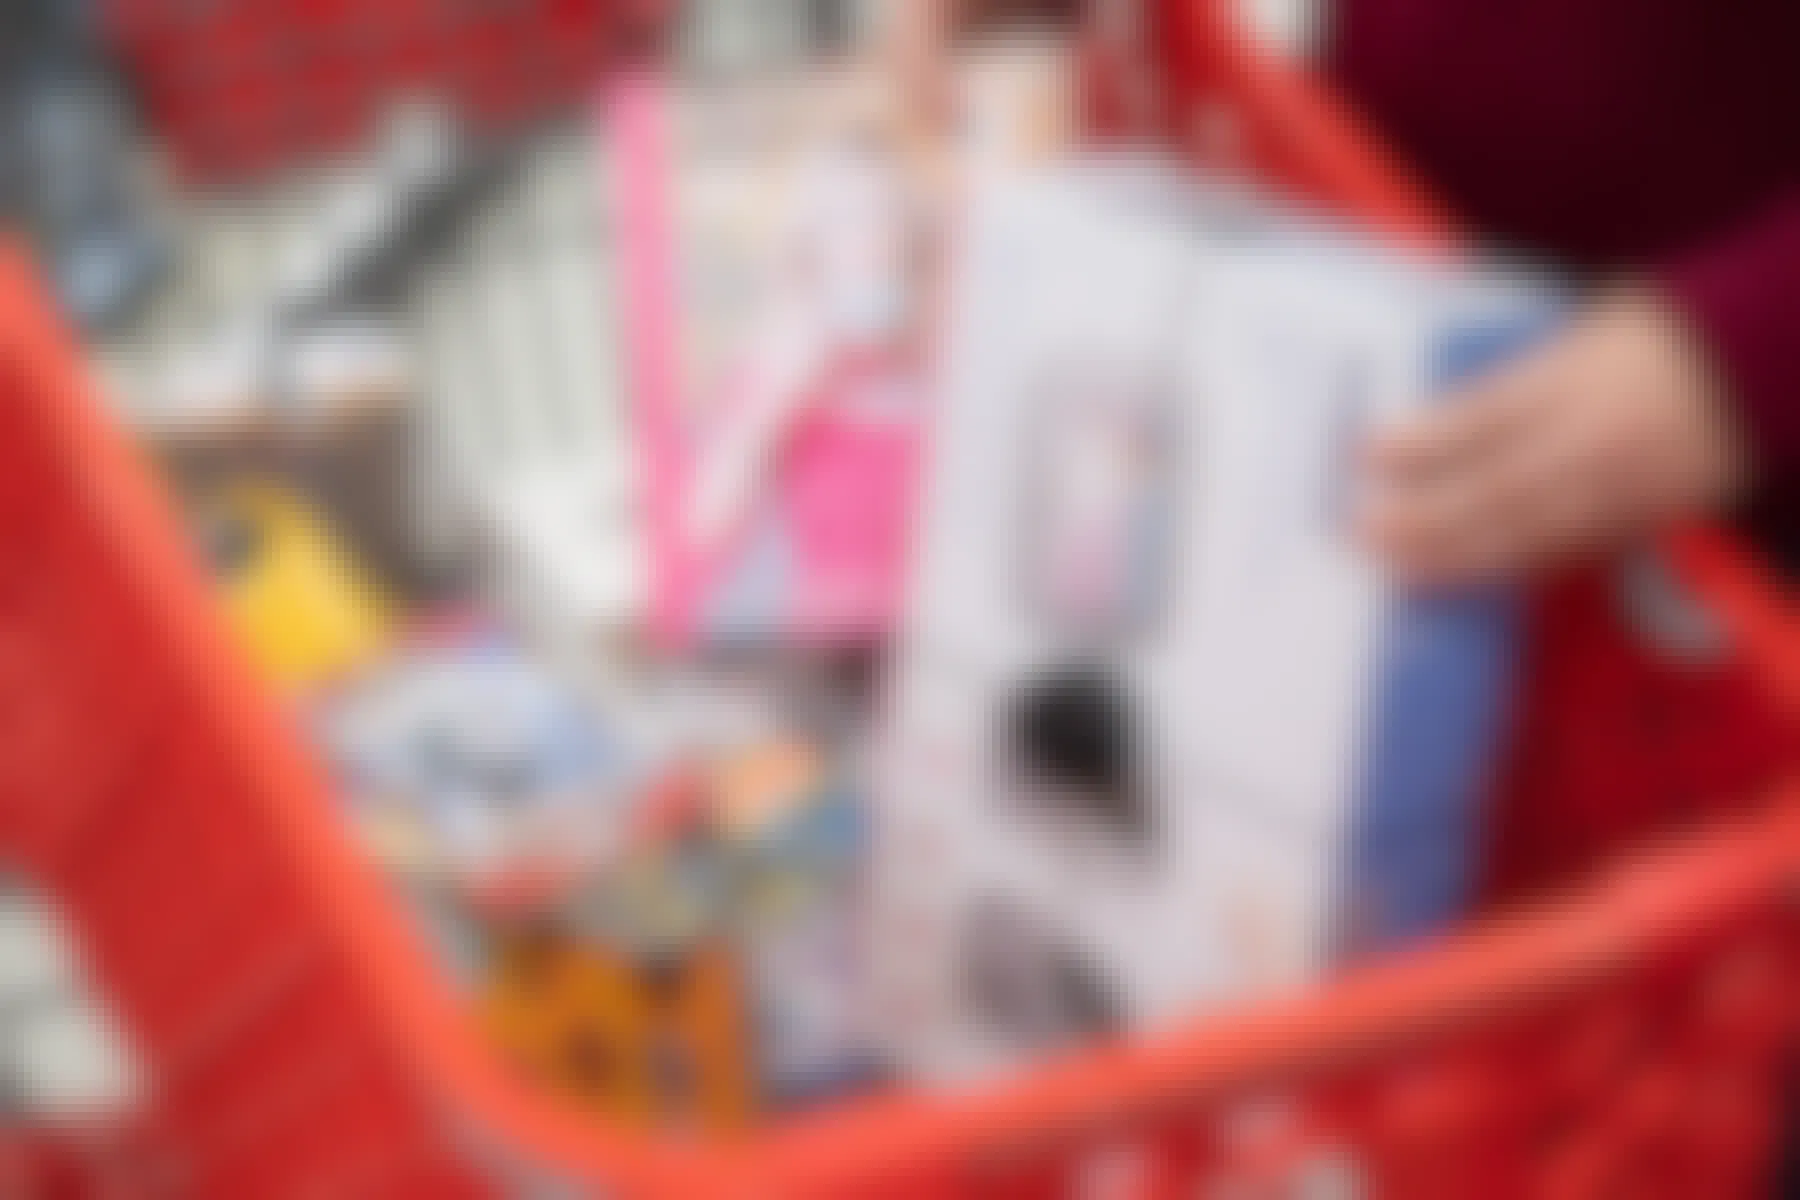 A person's hands placing a Vtech baby monitor and a book into a Target shopping cart filled with other items.